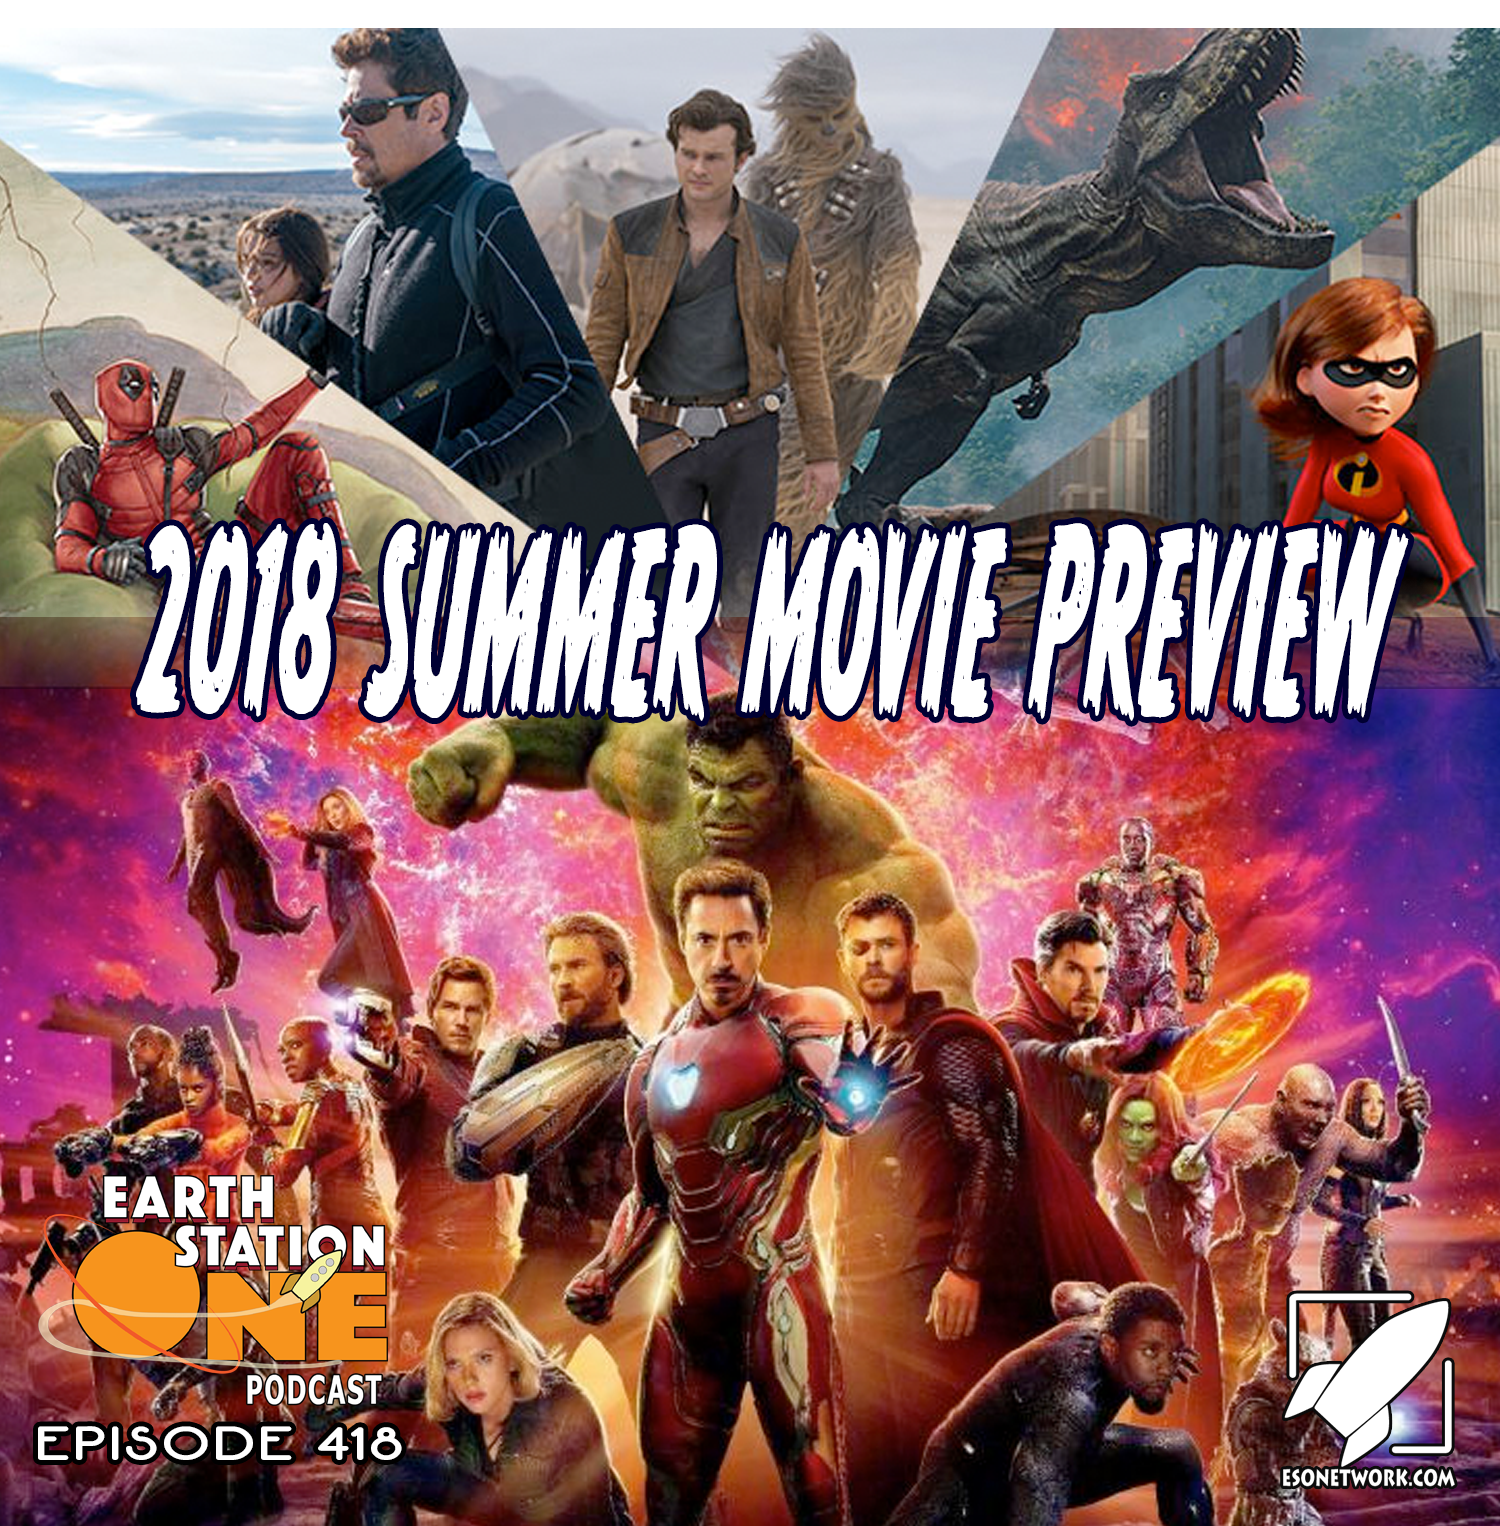 The Earth Station One Podcast Ep 418 - The 2018 Summer Movie Preivew